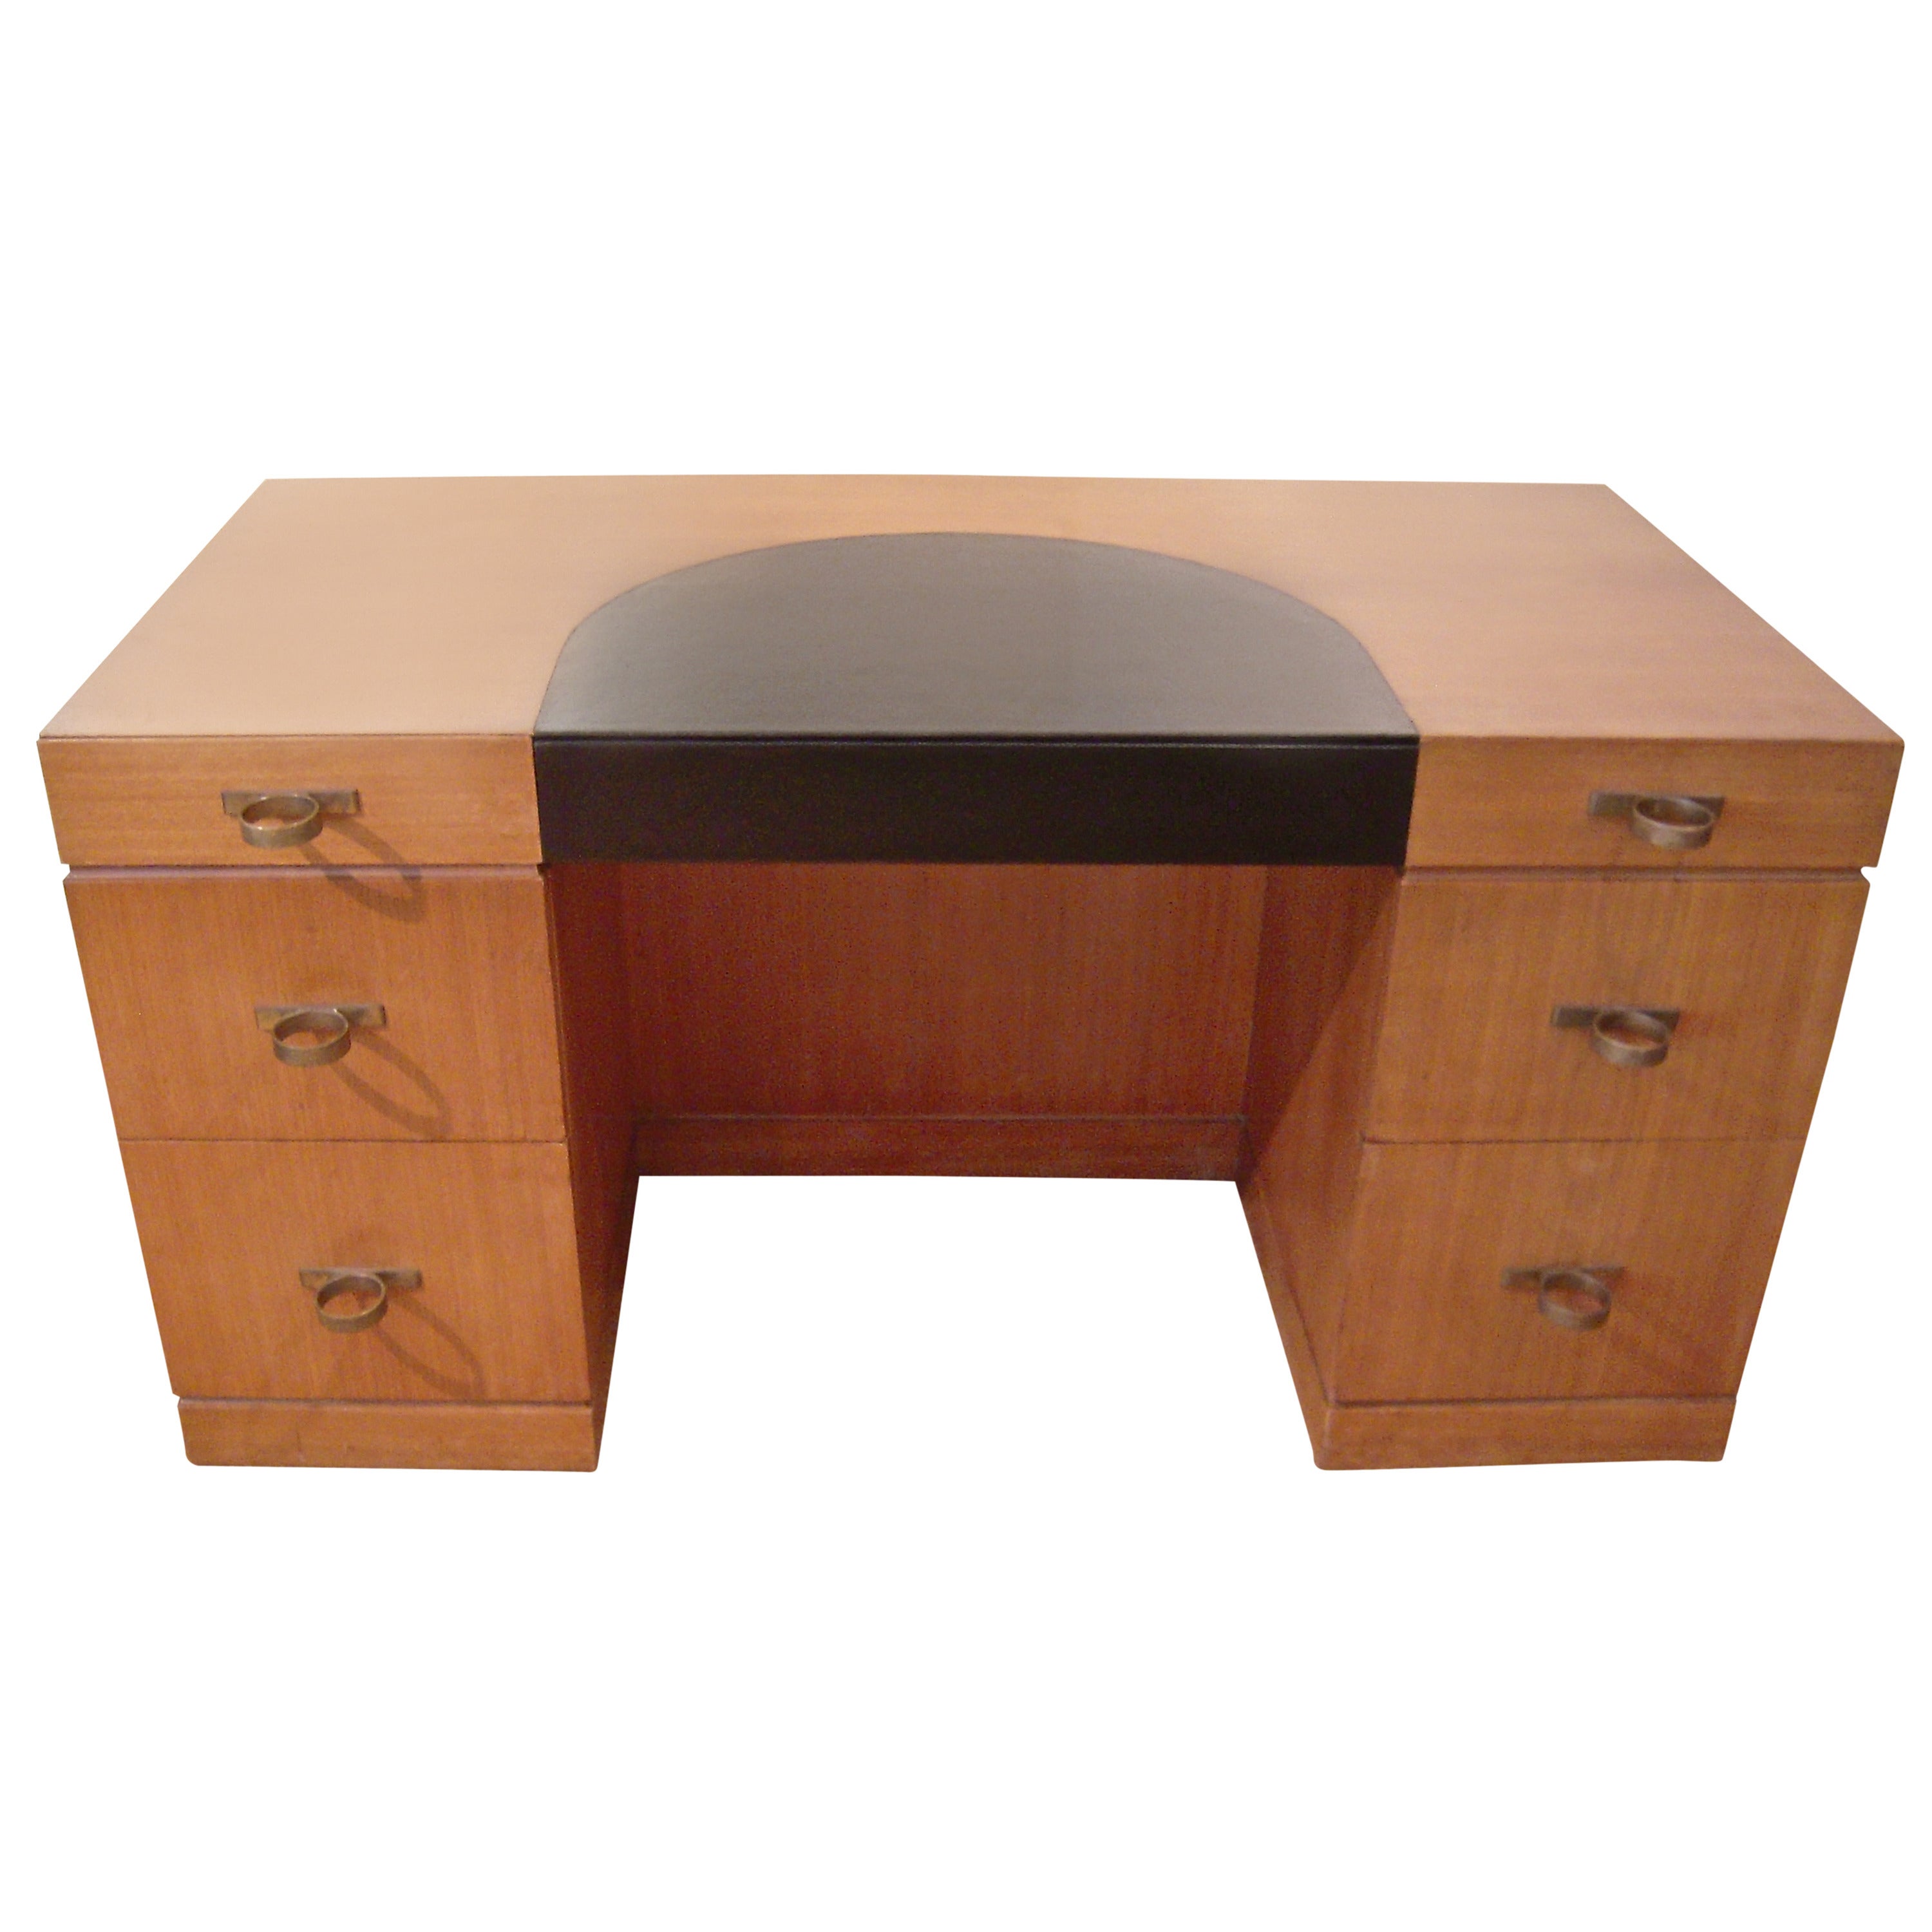 Art Deco Leather and Mahogany Desk with Fabulous Ring Drawer Pulls